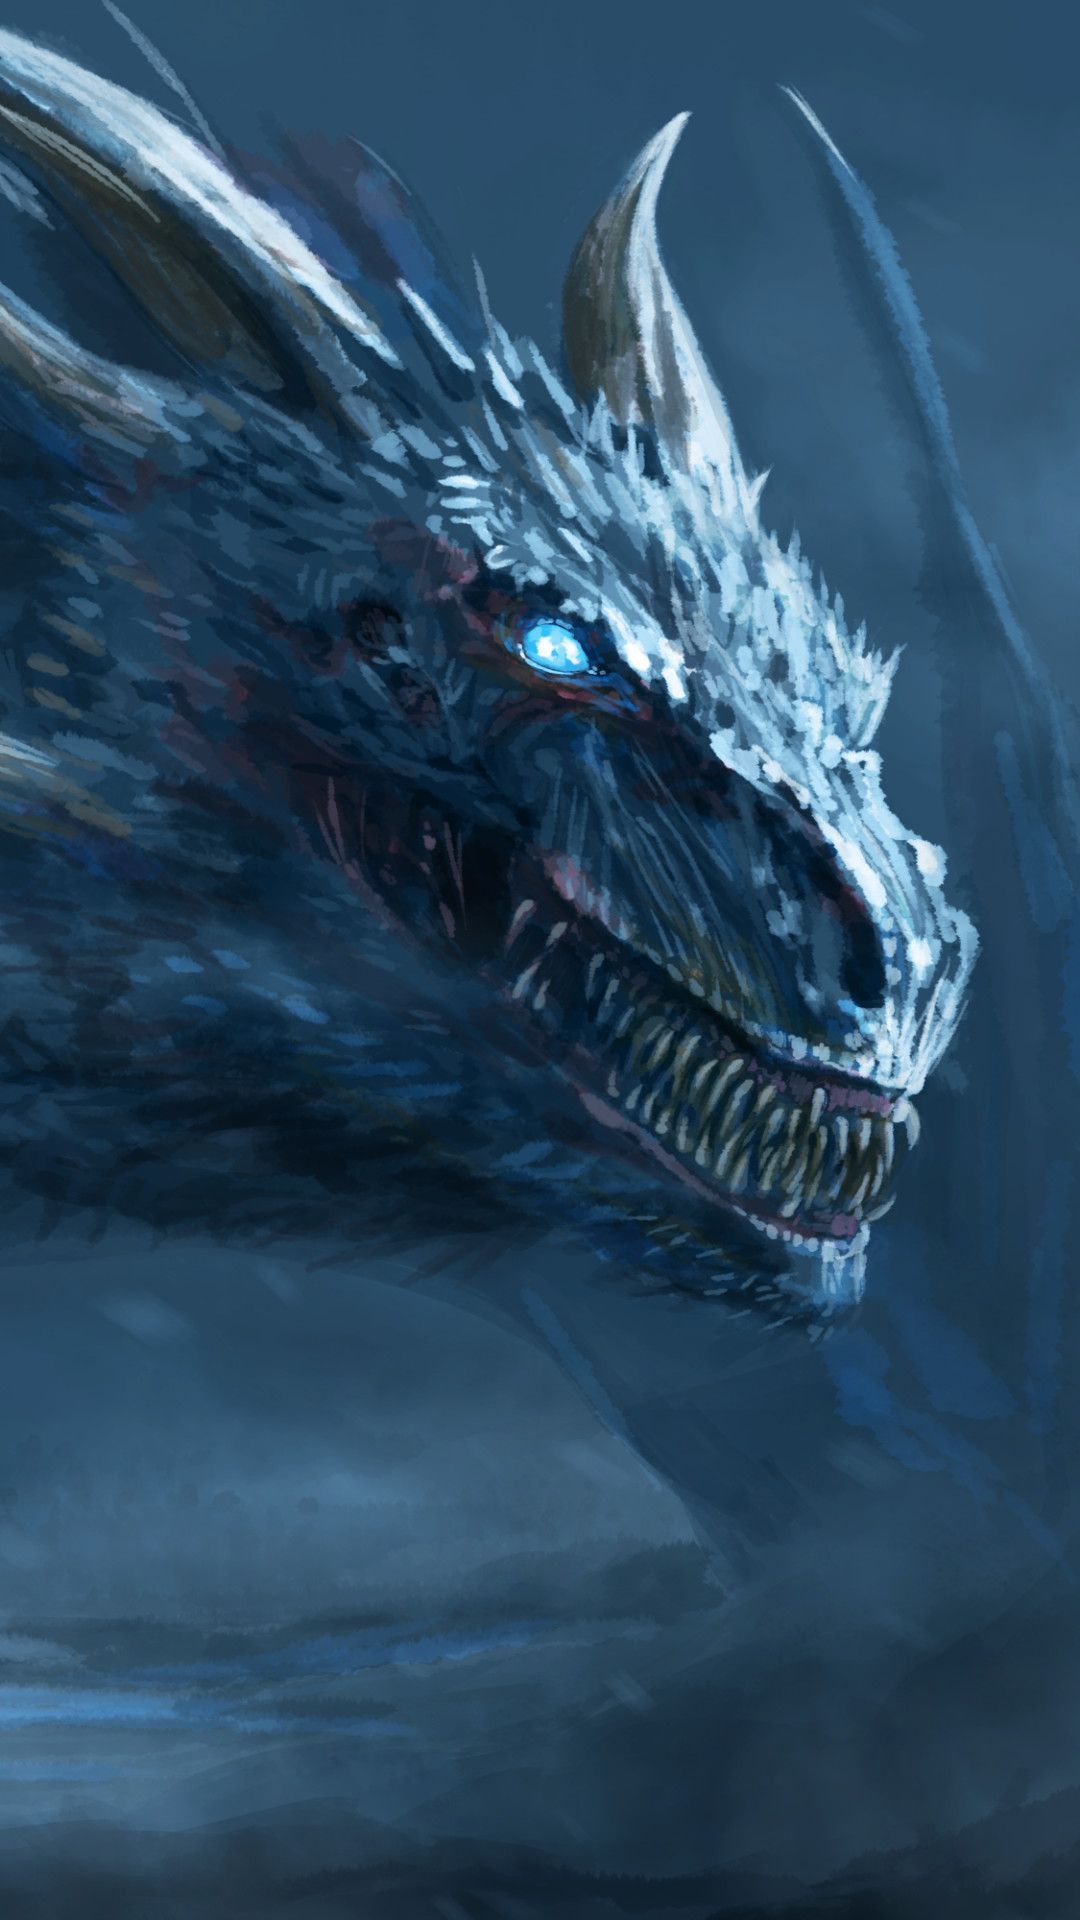 Dragon Game Of Thrones HD Wallpaper Android. HD wallpaper android, 4k wallpaper for mobile, Beautiful wallpaper for iphone